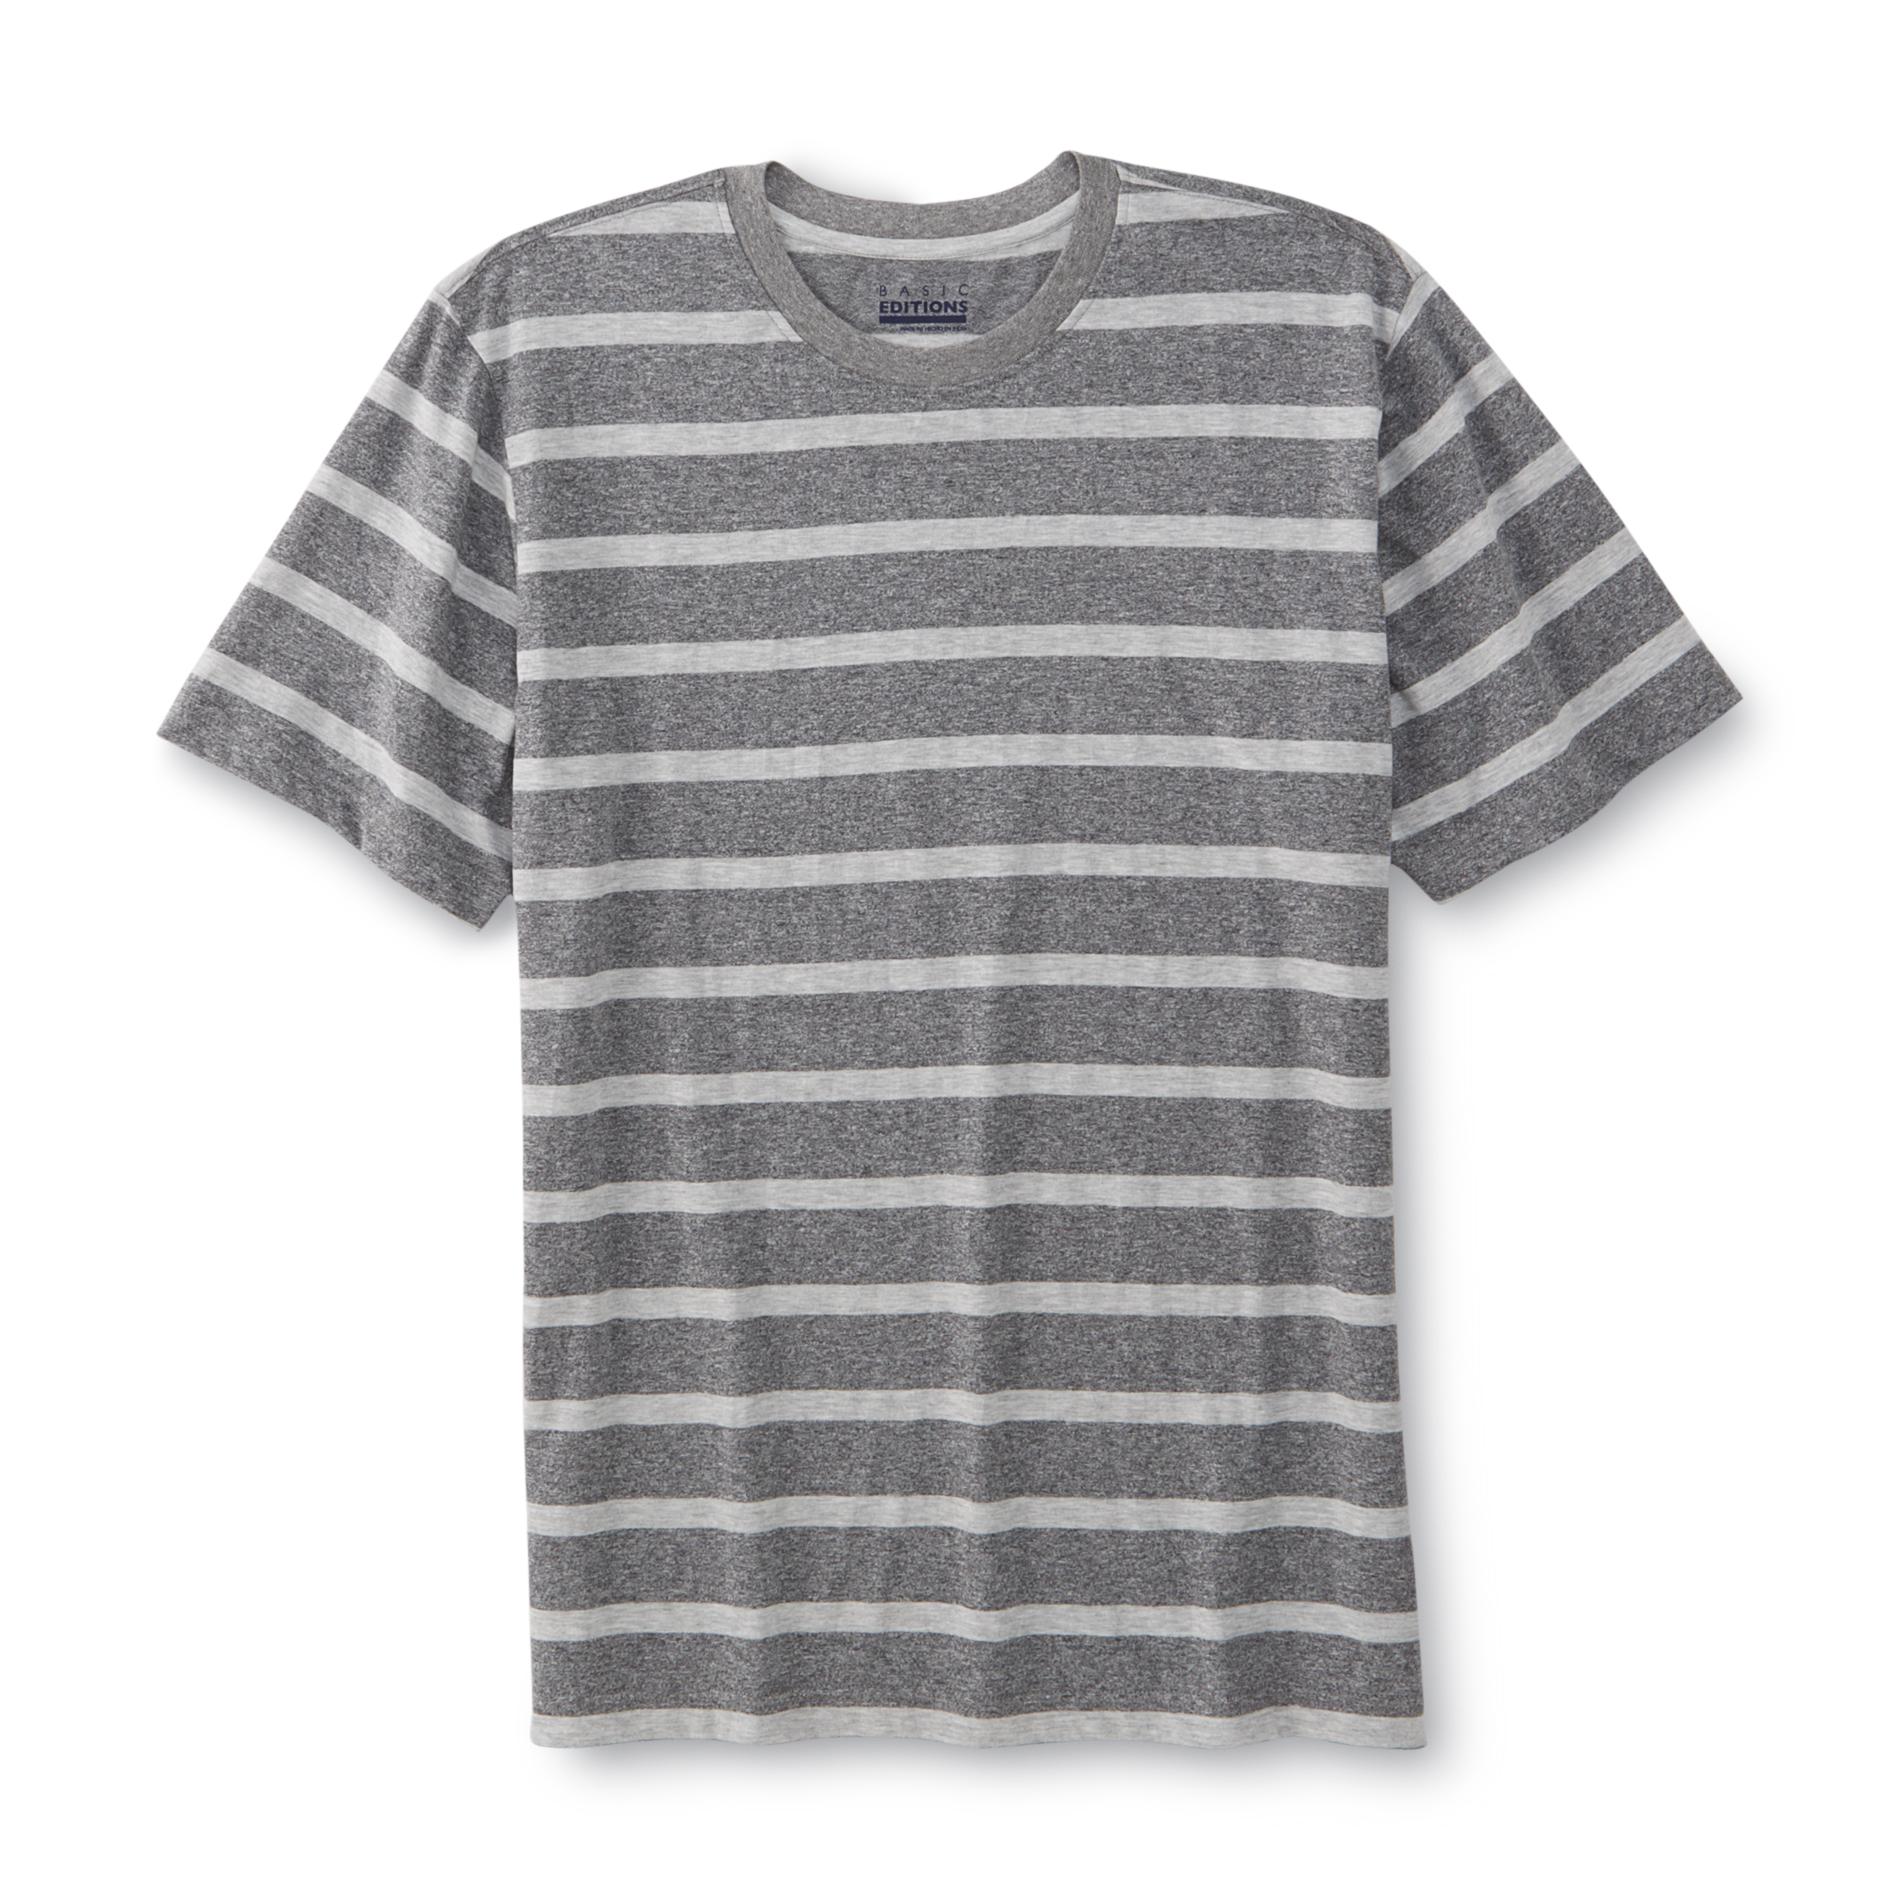 Basic Editions Men's Big & Tall T-Shirt - Striped | Shop Your Way ...